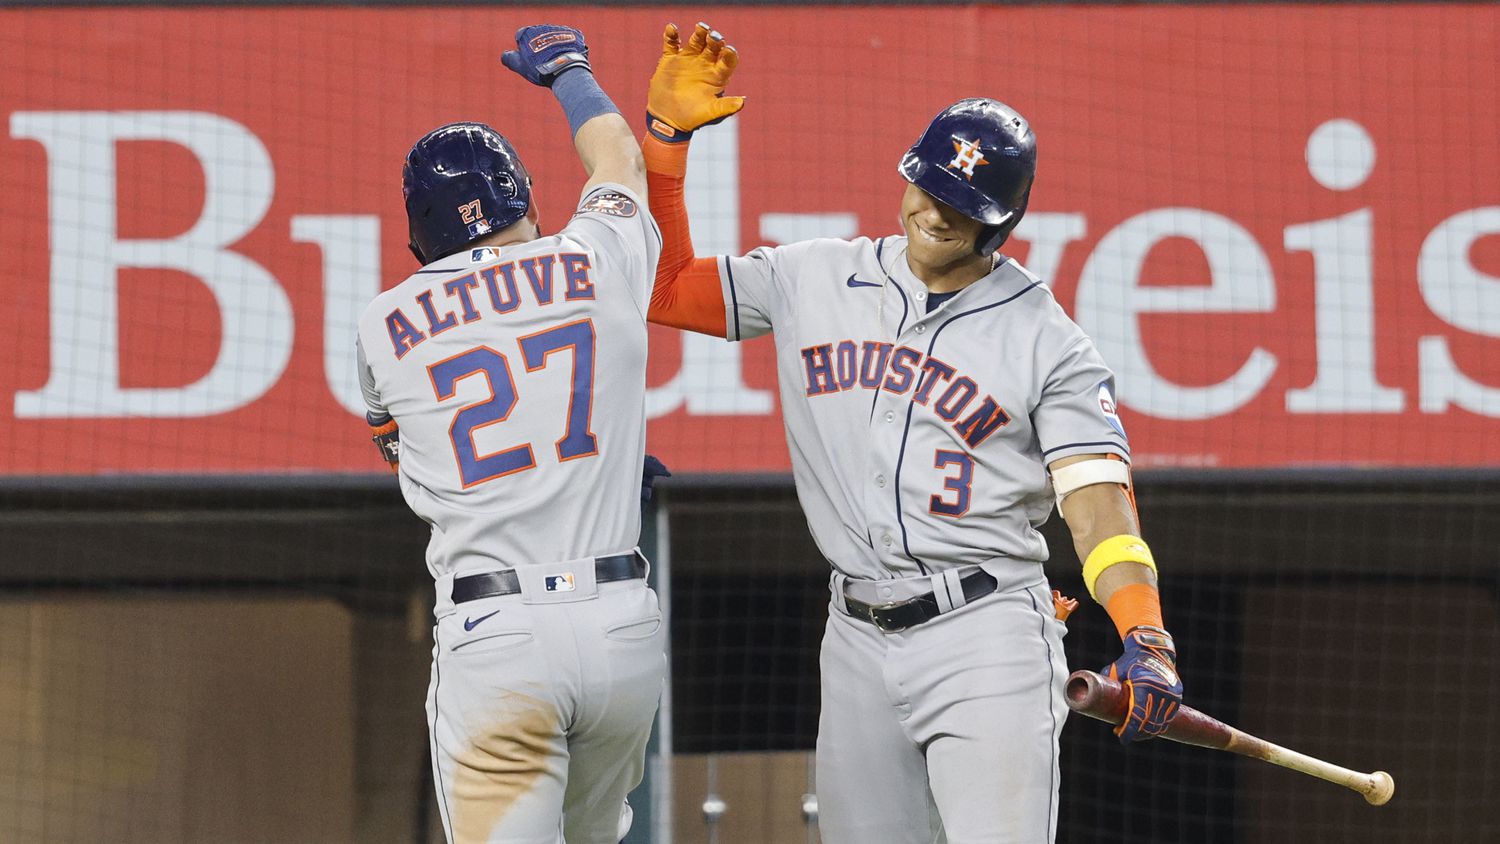 Houston Astros second baseman Jose Altuve (27) gets a high-five from his teammate shortstop...